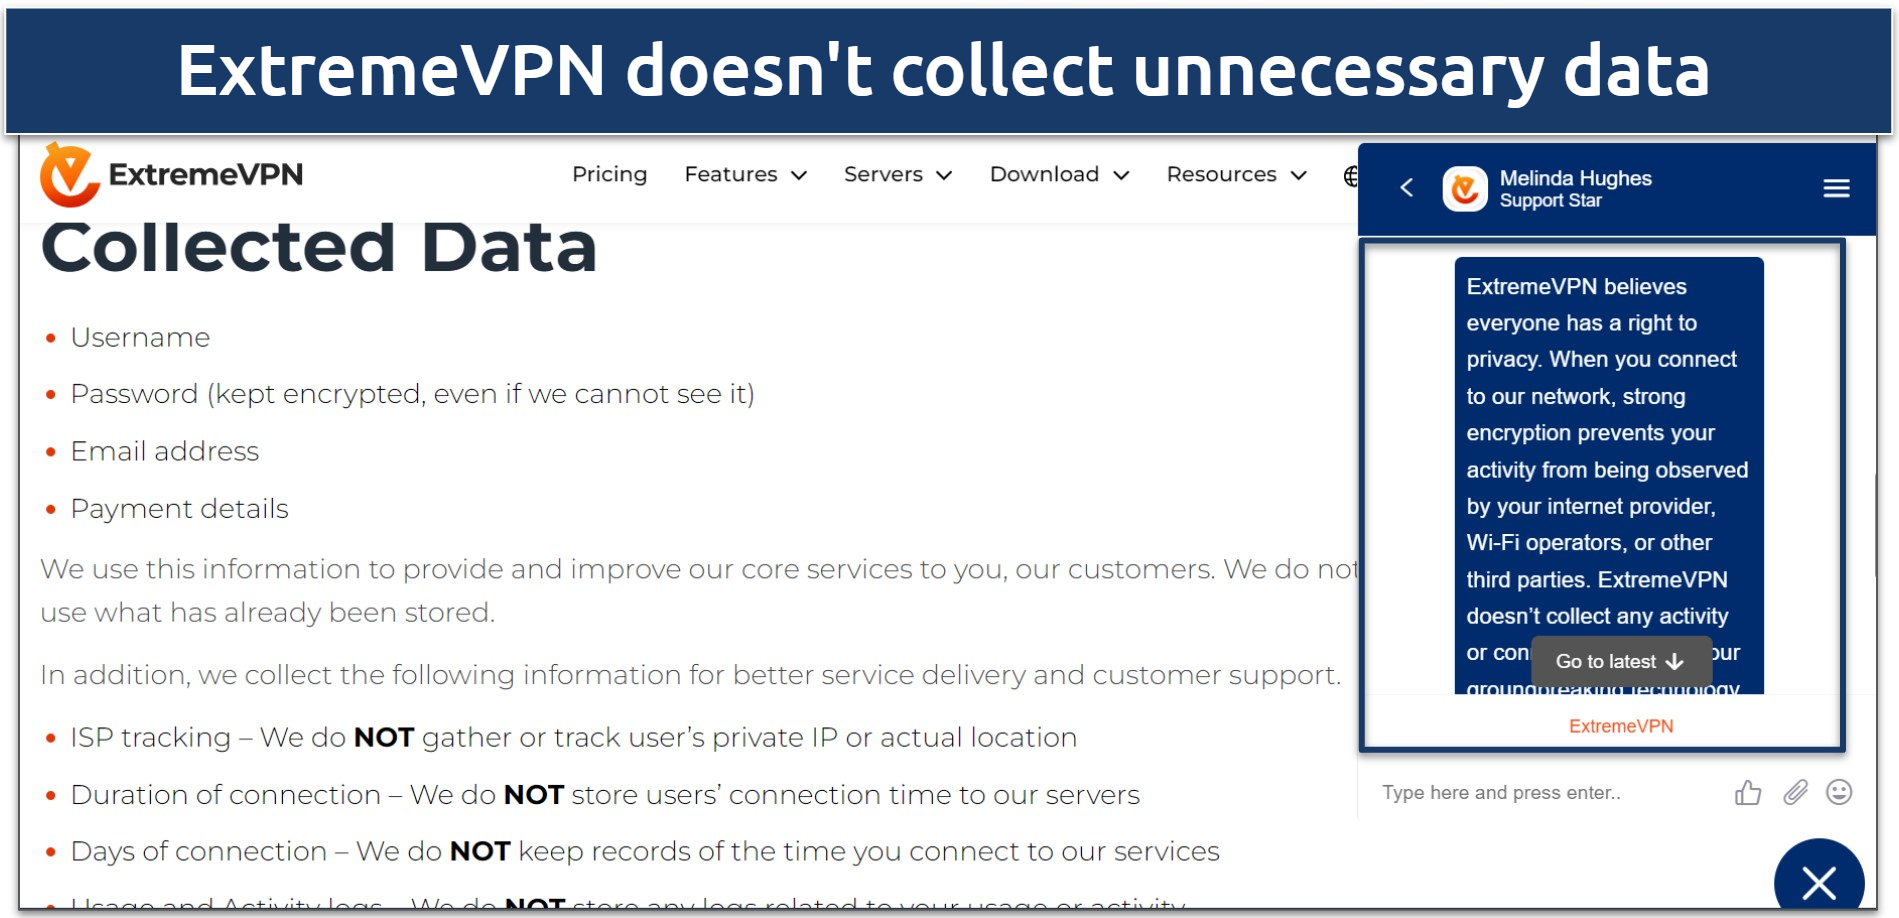 Screenshot of ExtremeVPN's privacy policy showing the data it collects